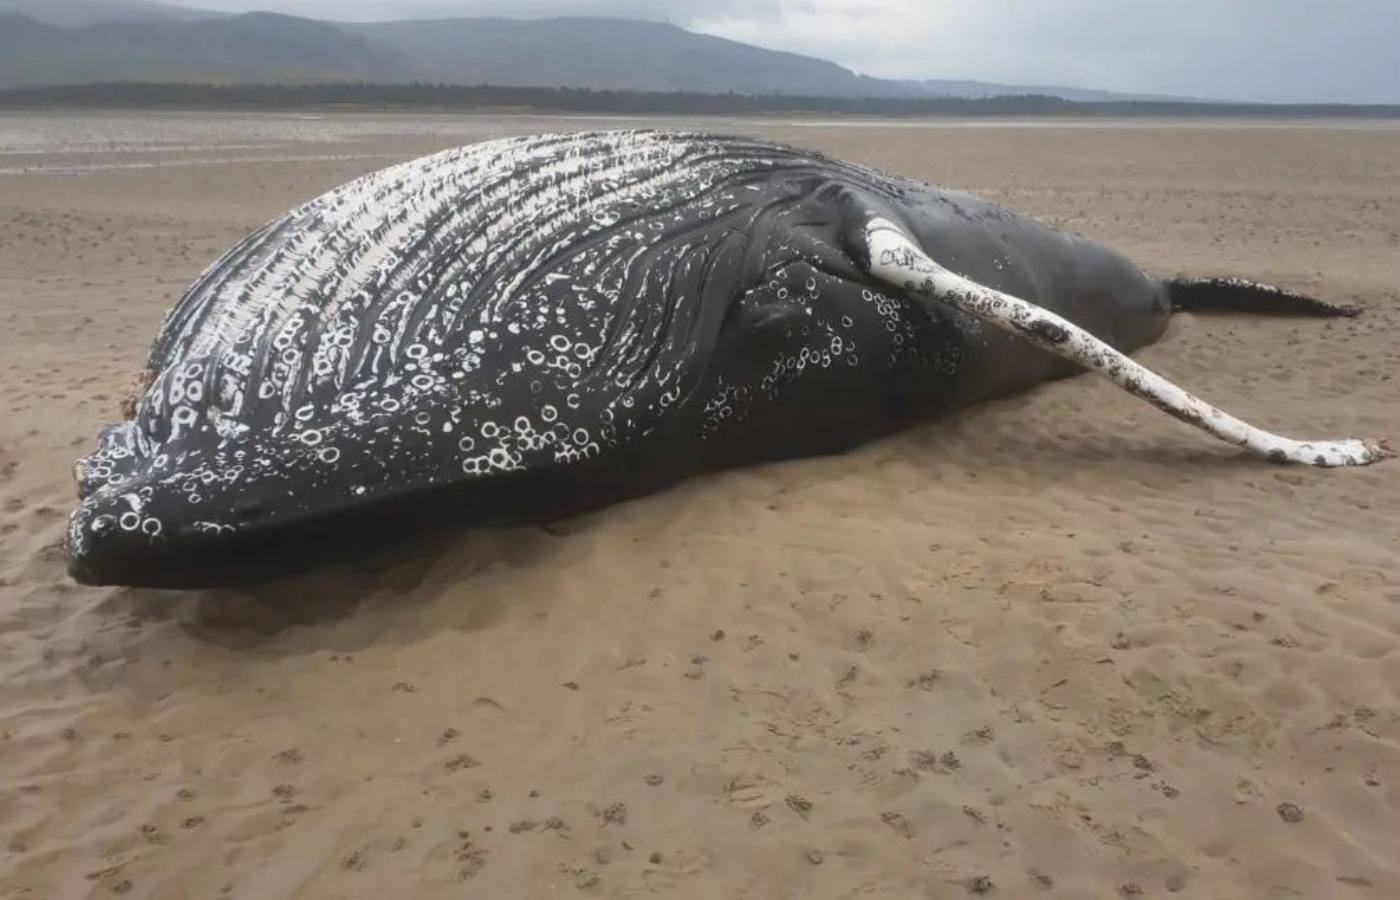 The whale was discovered on Thursday. (Image: Highland Croft/@highland_croft via Supplied)